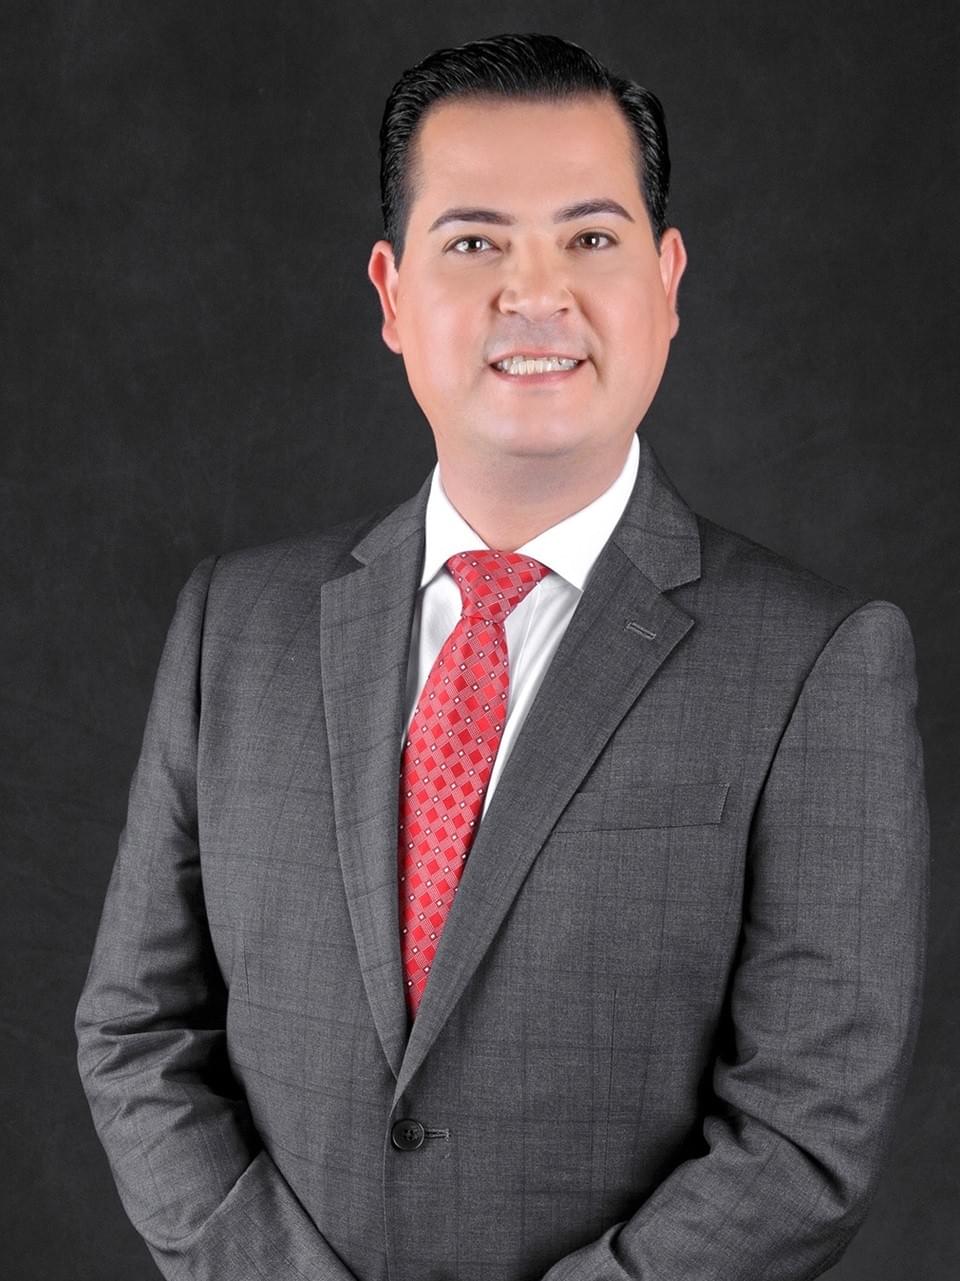 Bakersfield College To Induct Hispanic Chamber President Jay Tamsi Into The BC Alumni Hall Of Fame